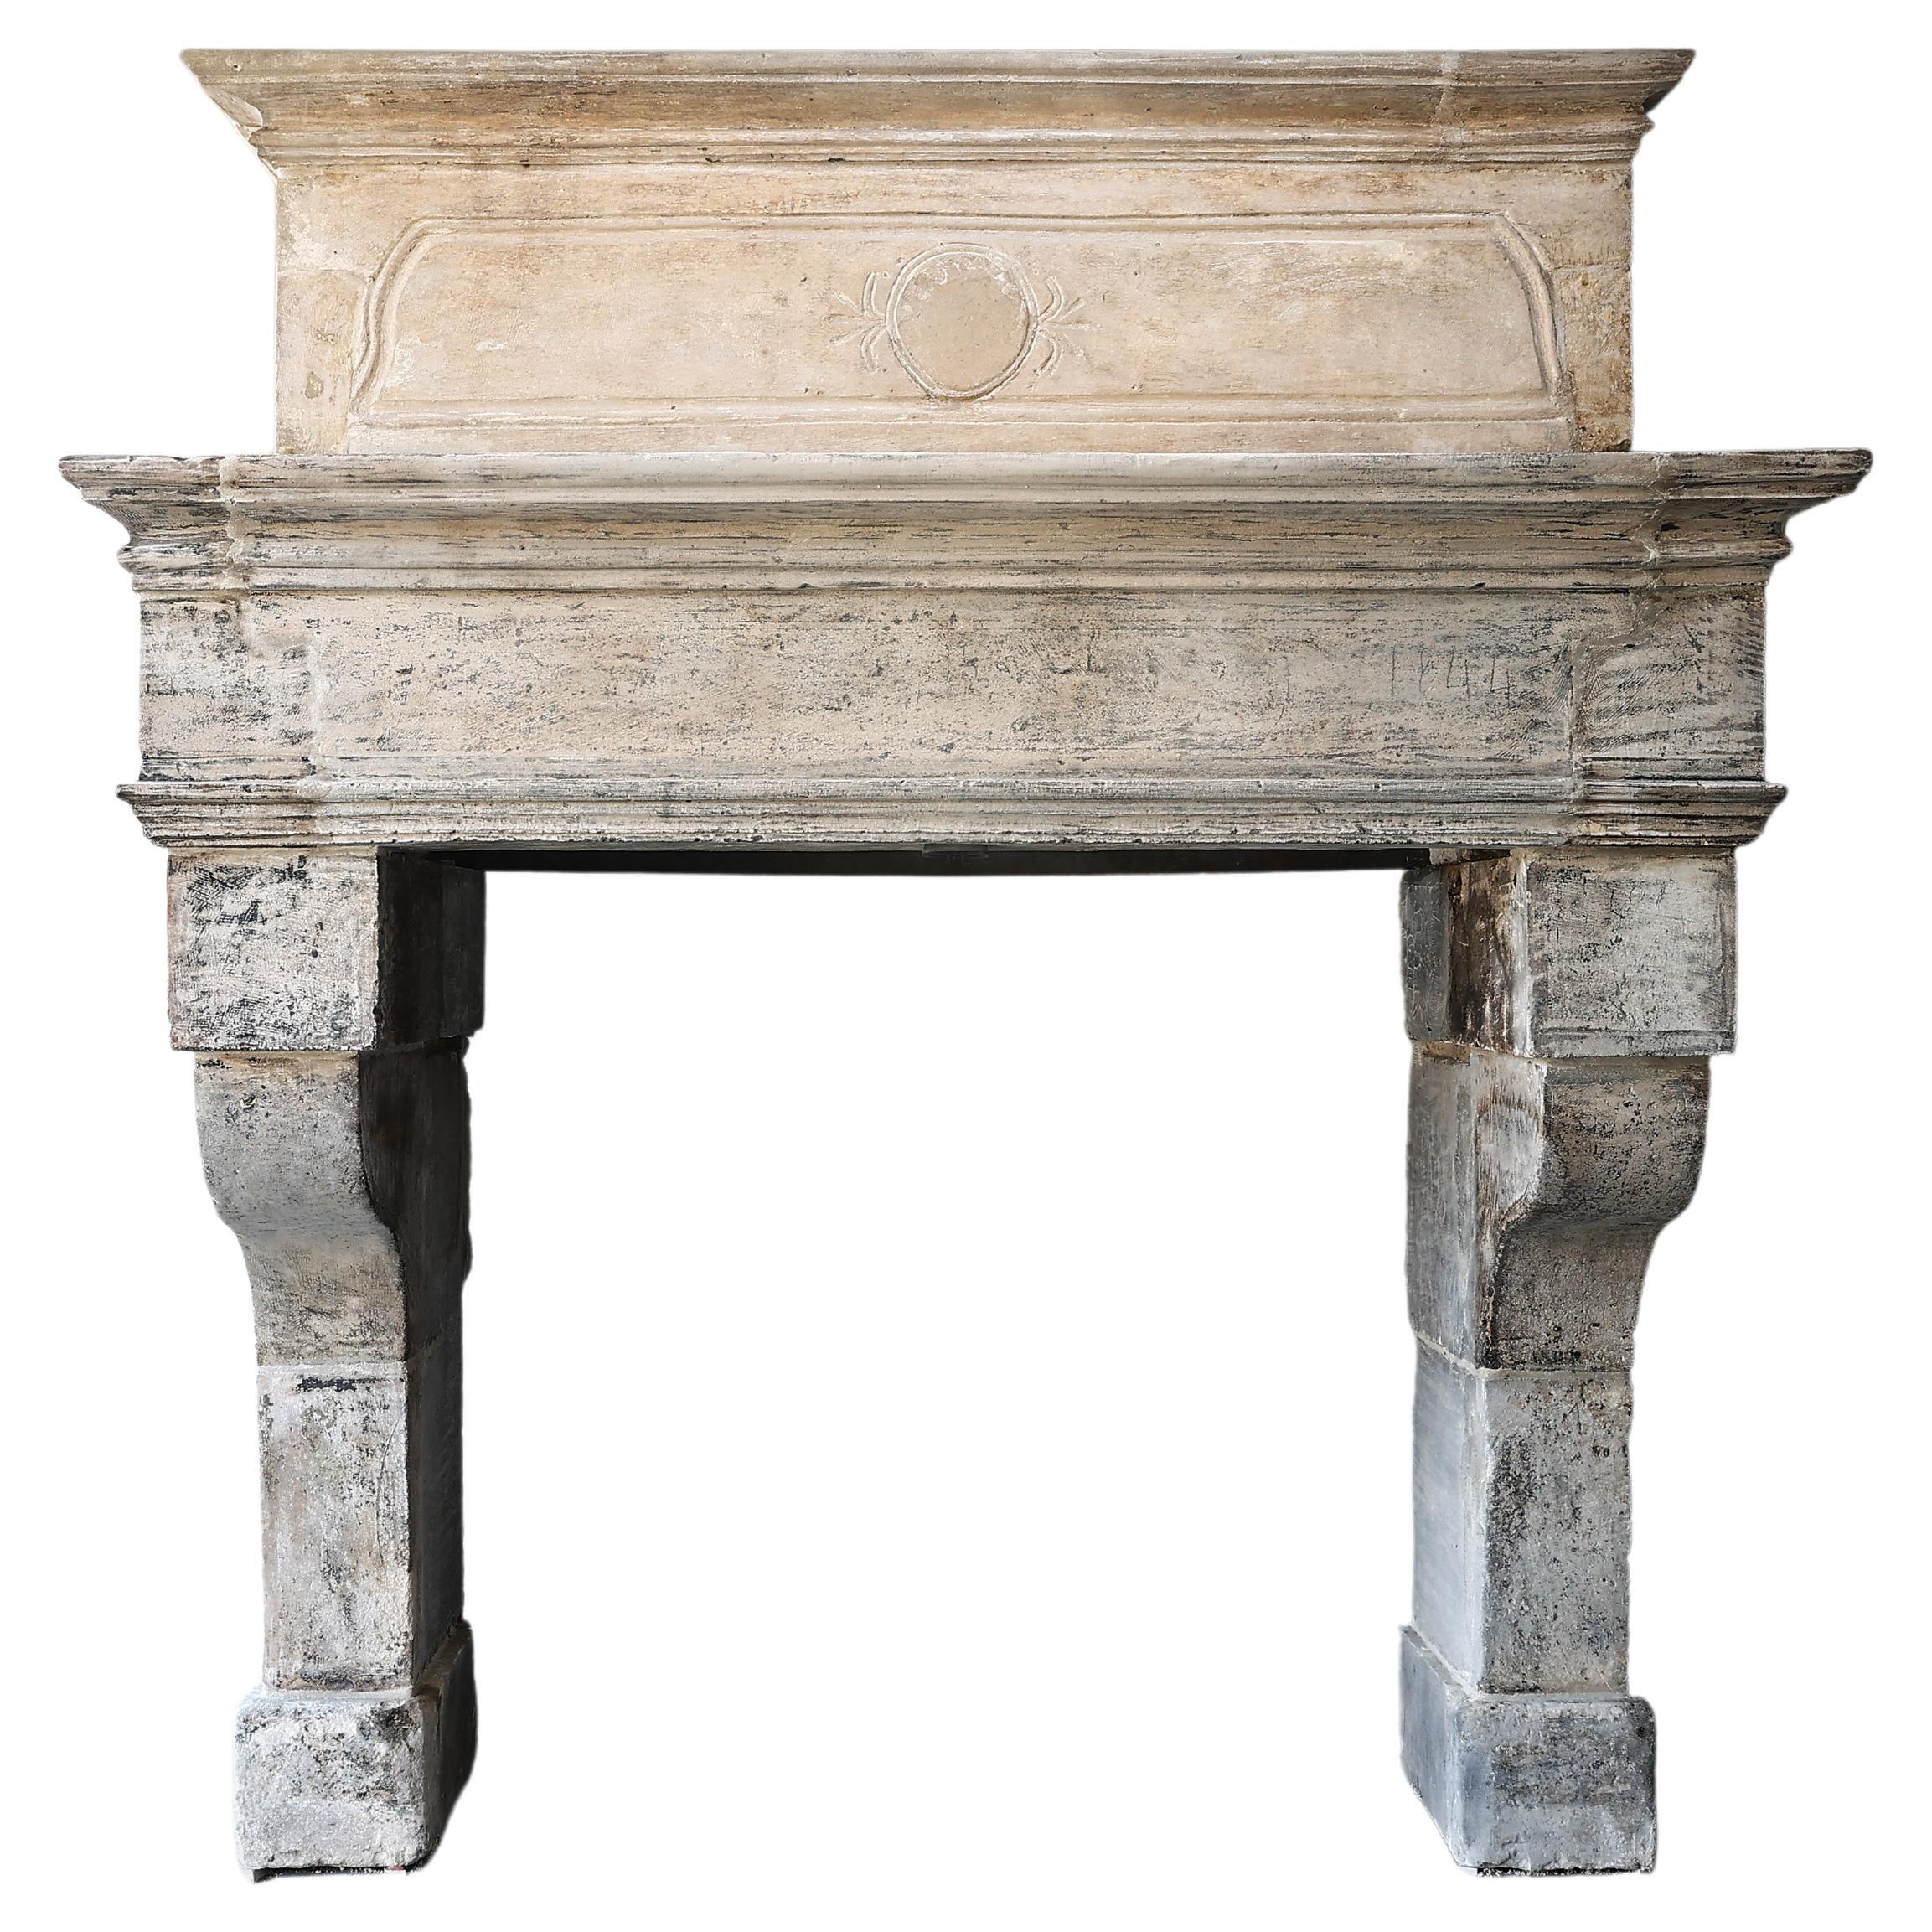 18th Century Castle Fireplace with Trumeau of French Limestone, Louis XIII